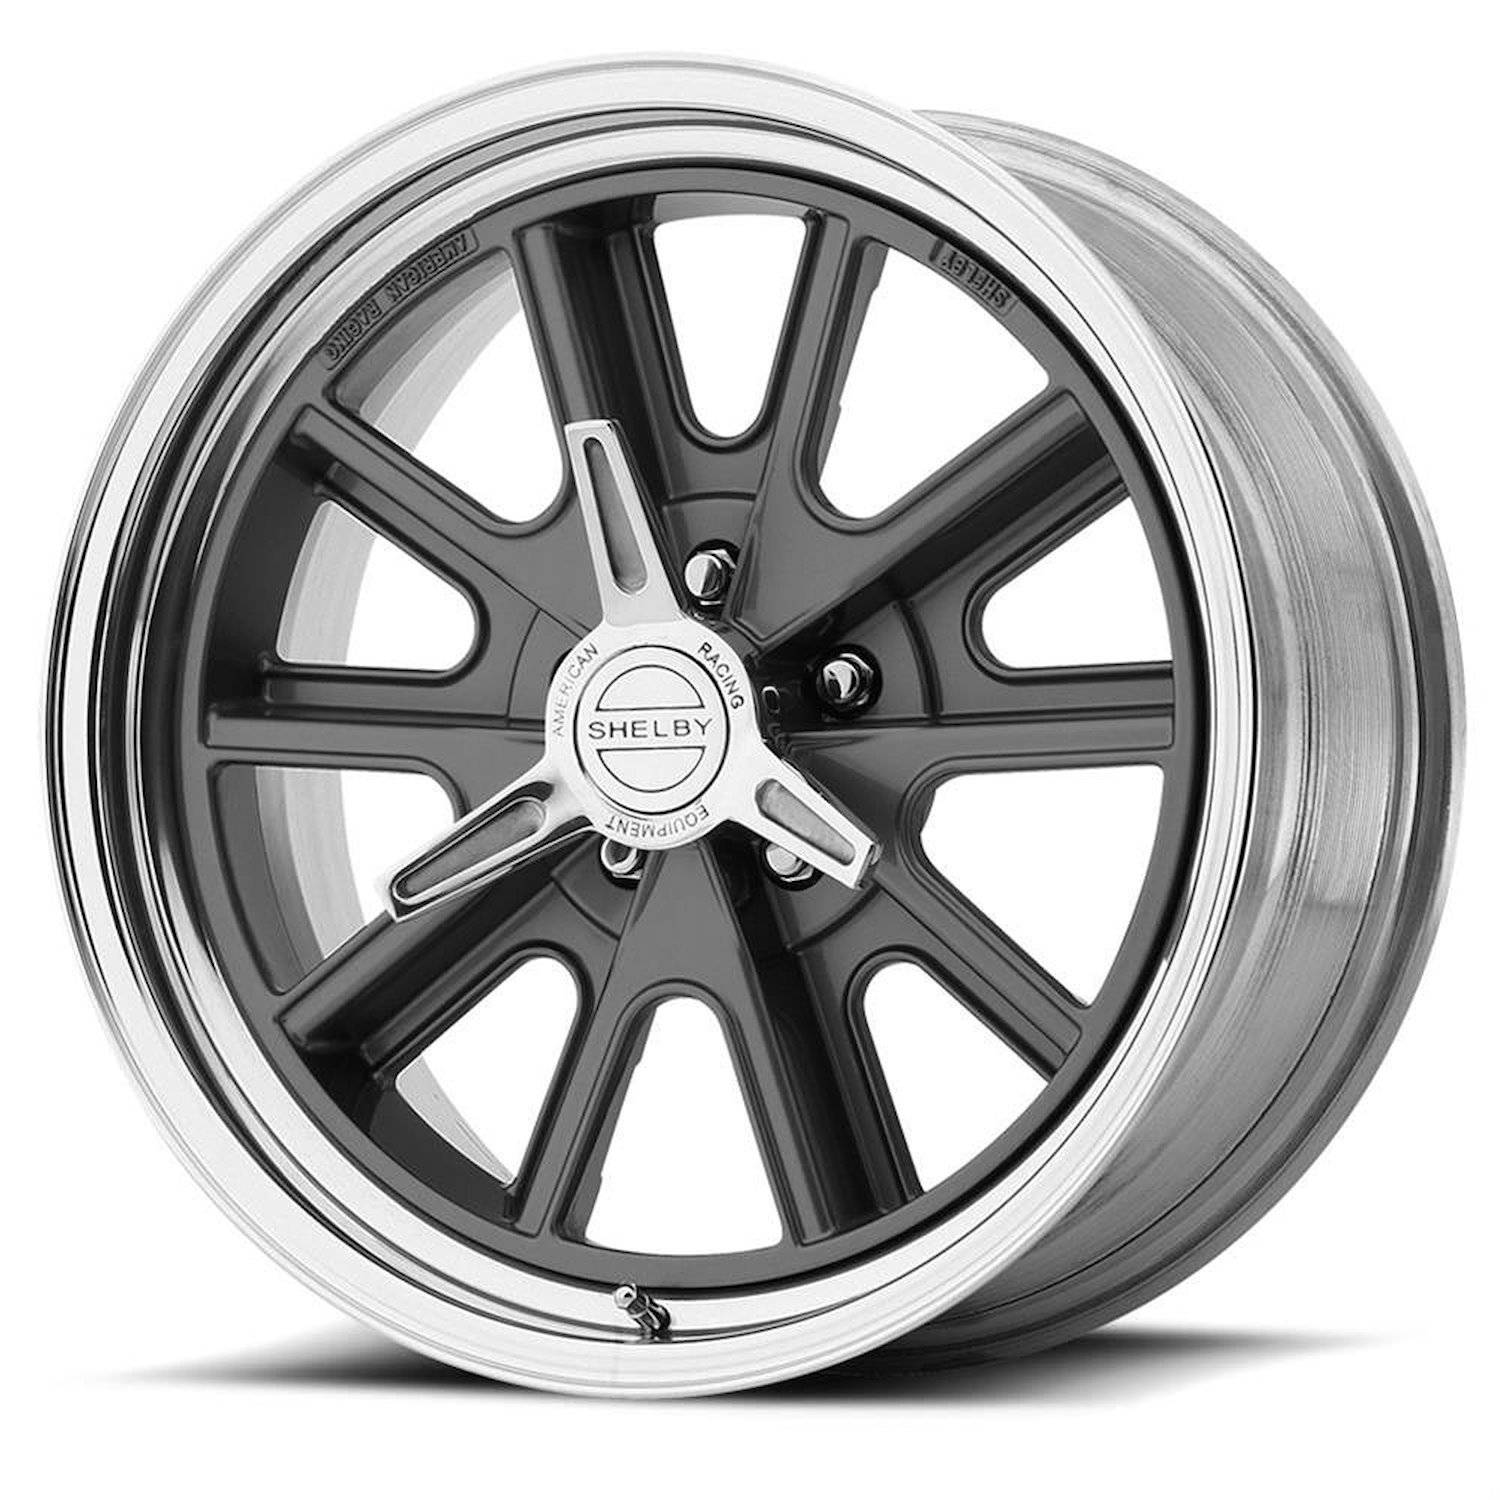 AMERICAN RACING 427 SHELBY COBRA TWO-PIECE MAG GRAY CENTER POLISHED BARREL 15 x 8 5X4.75 -25 3.52